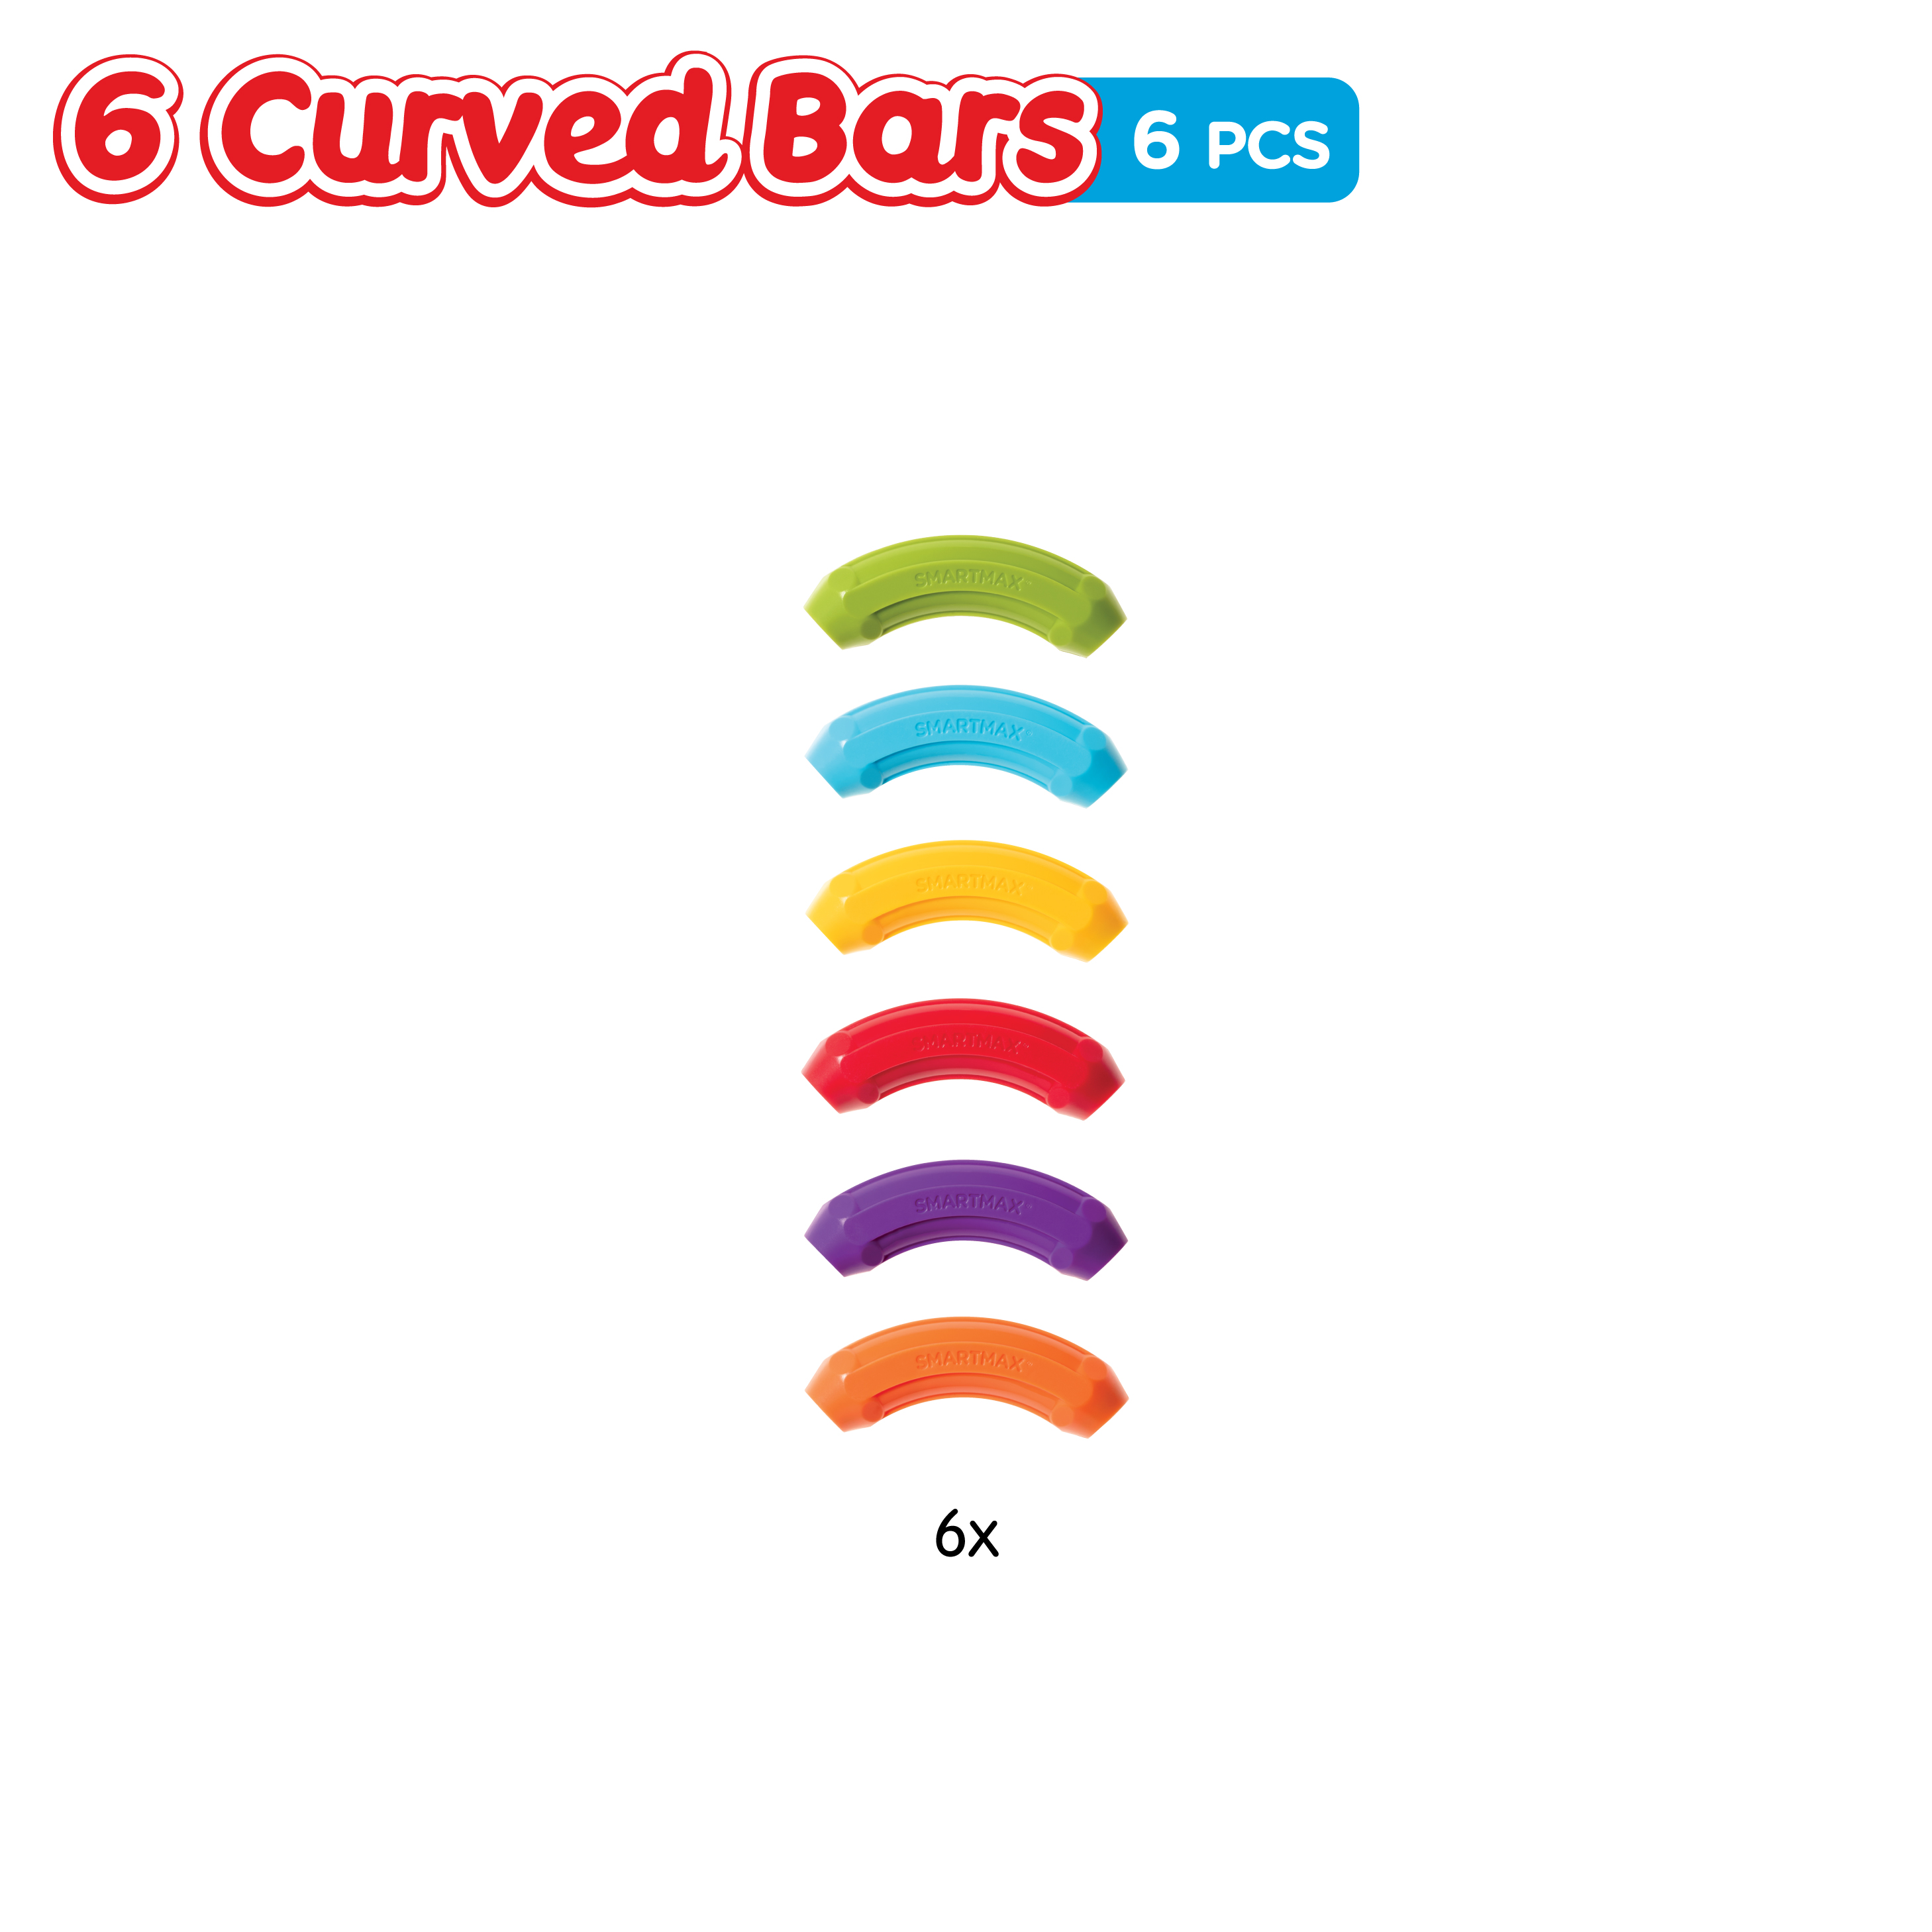 6 Curved Bars